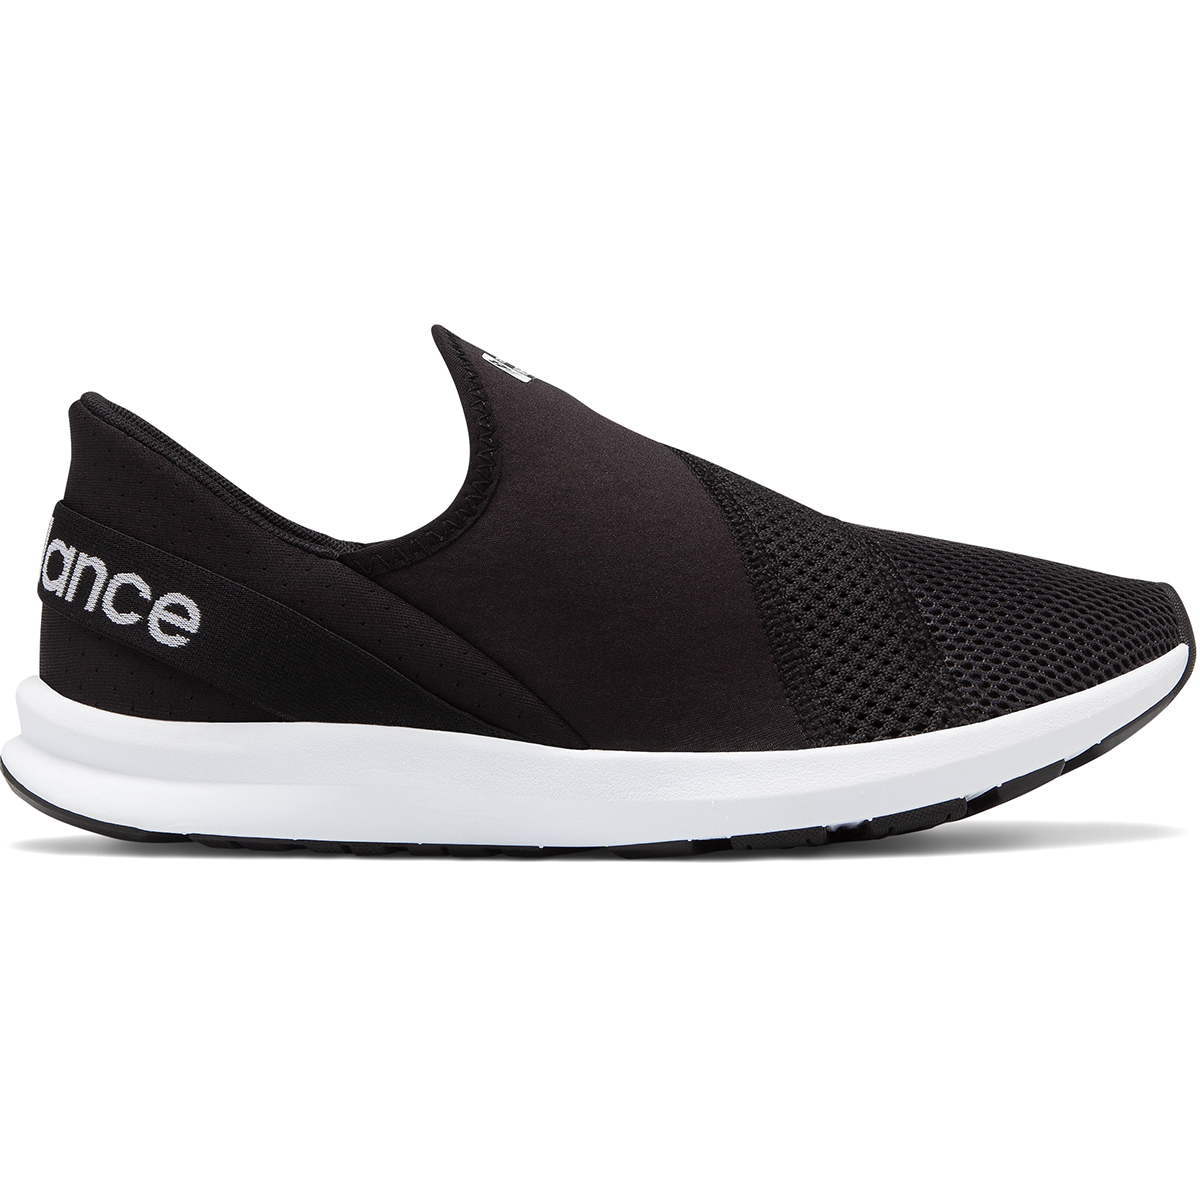 New Balance Women's Fuelcore Nergize Easy Slip-On Shoes - Black, 8.5